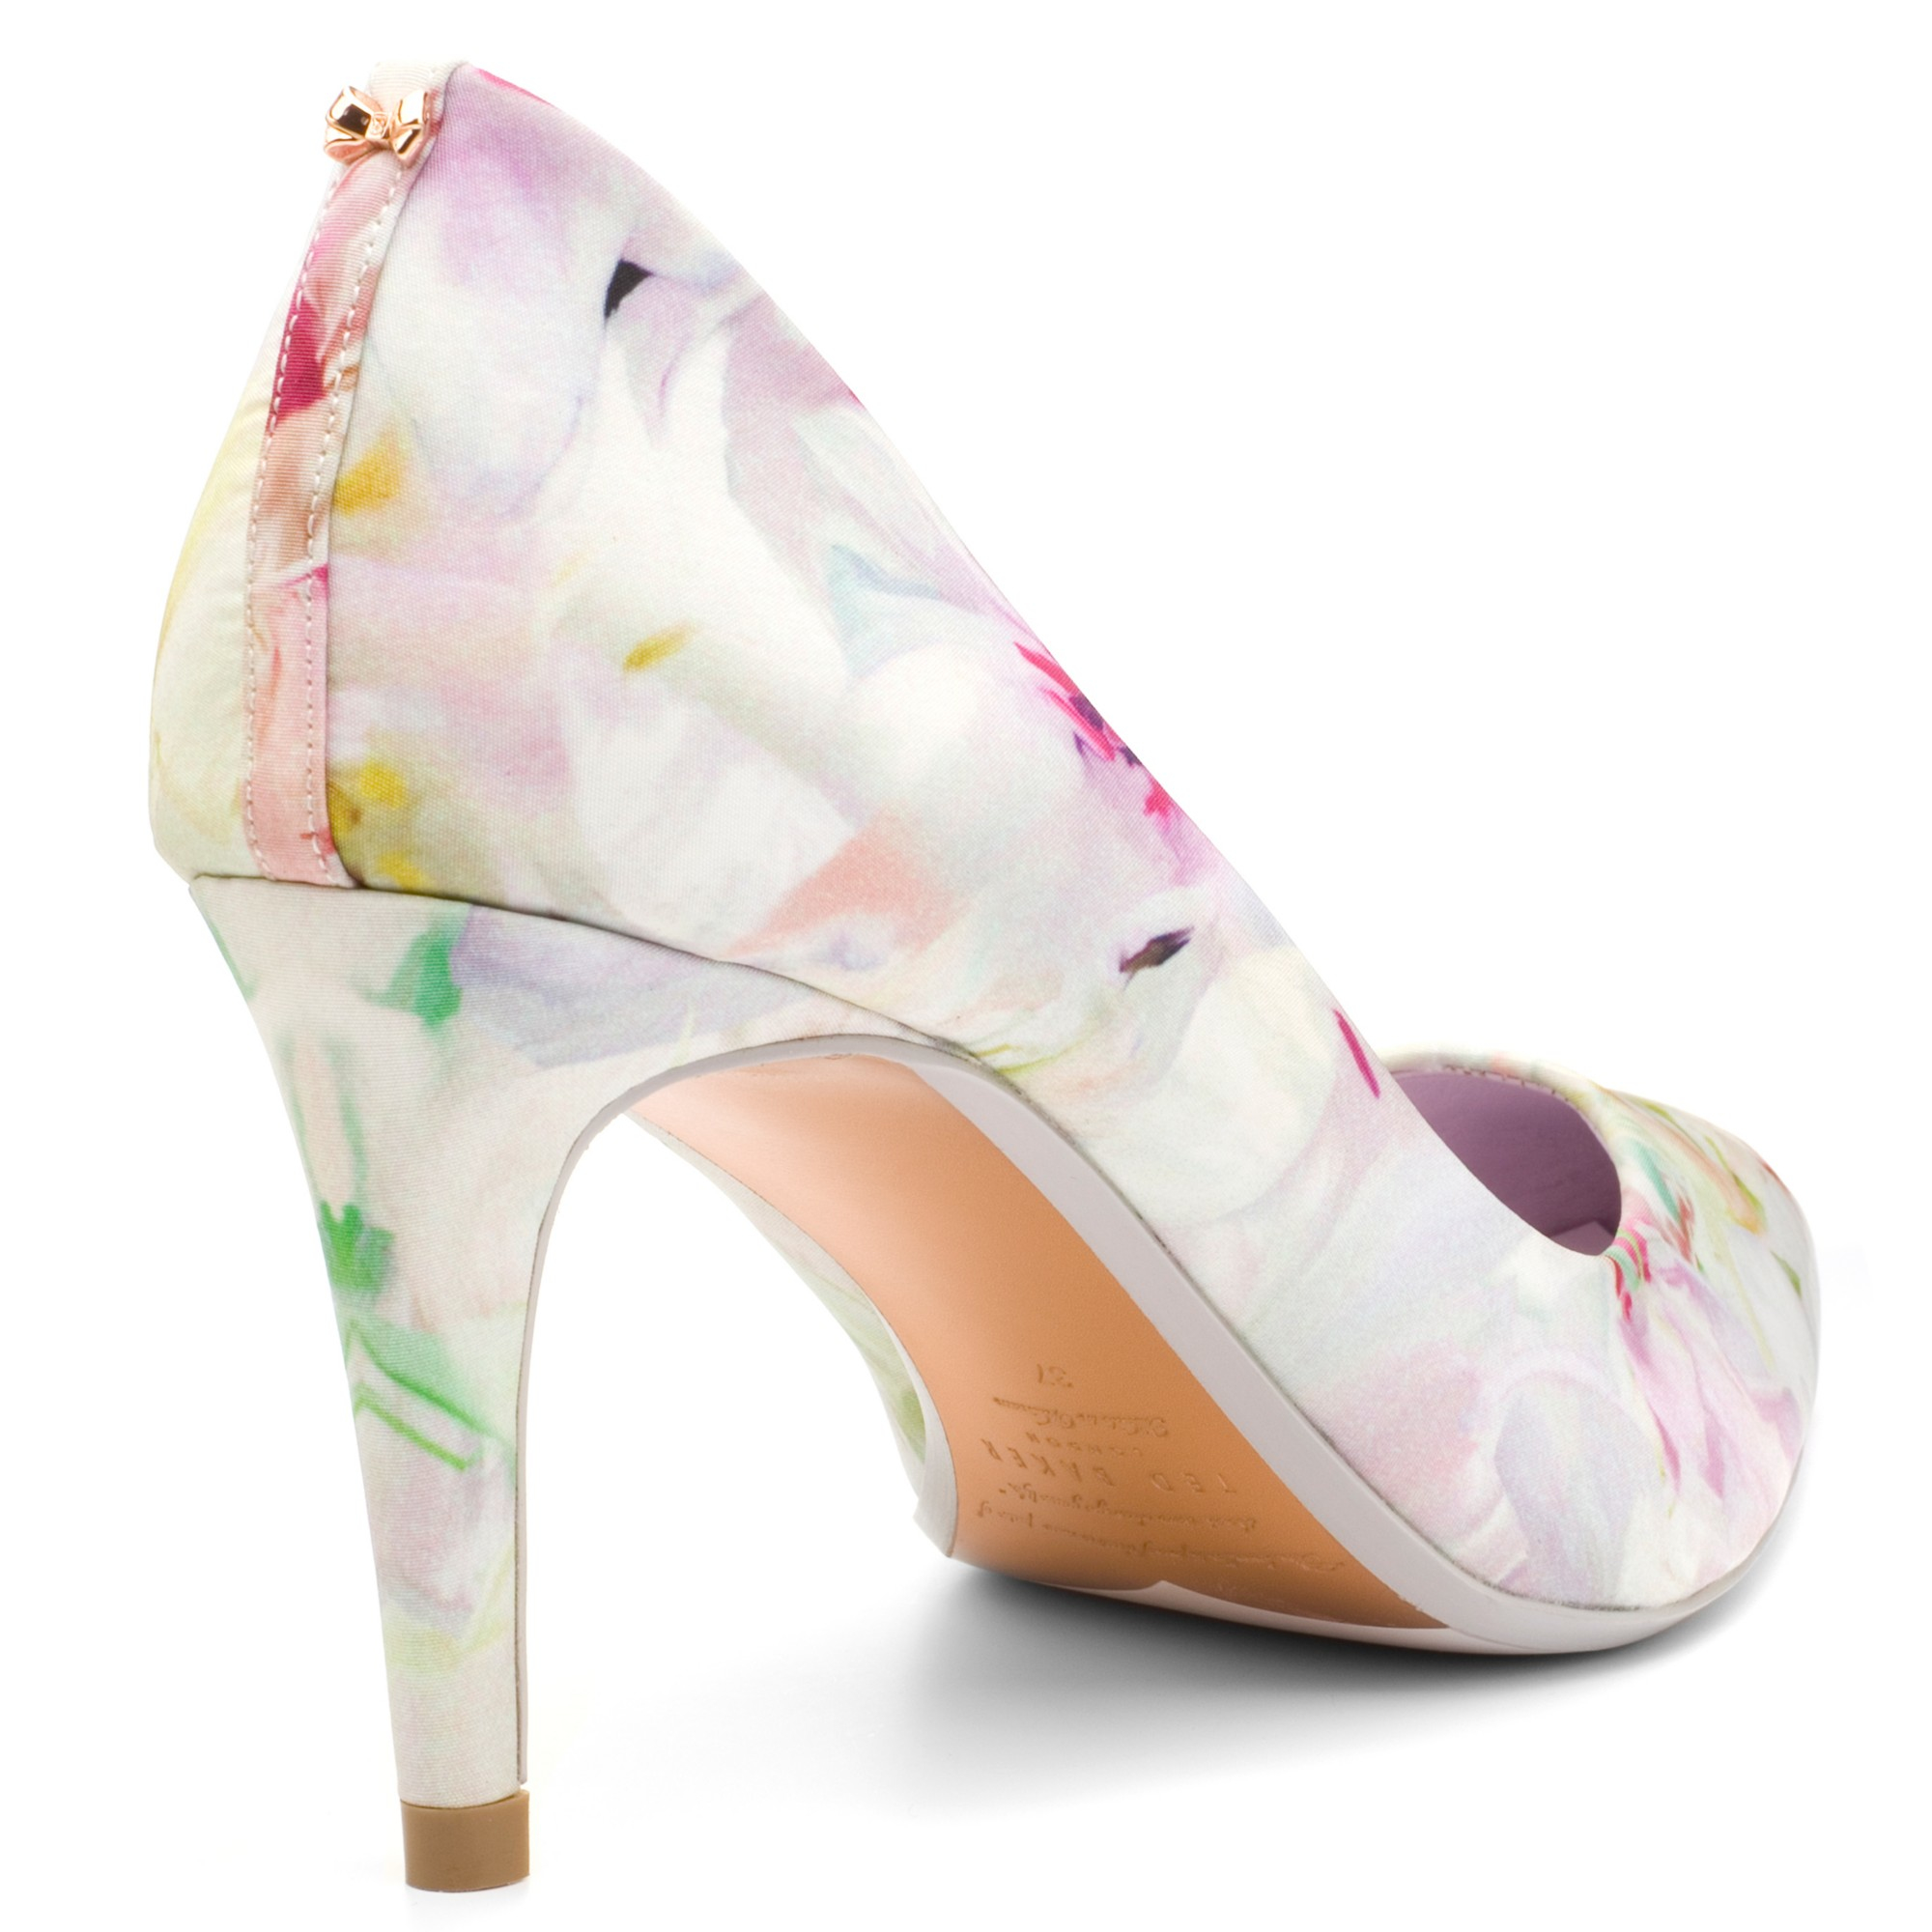 ted baker floral court shoes